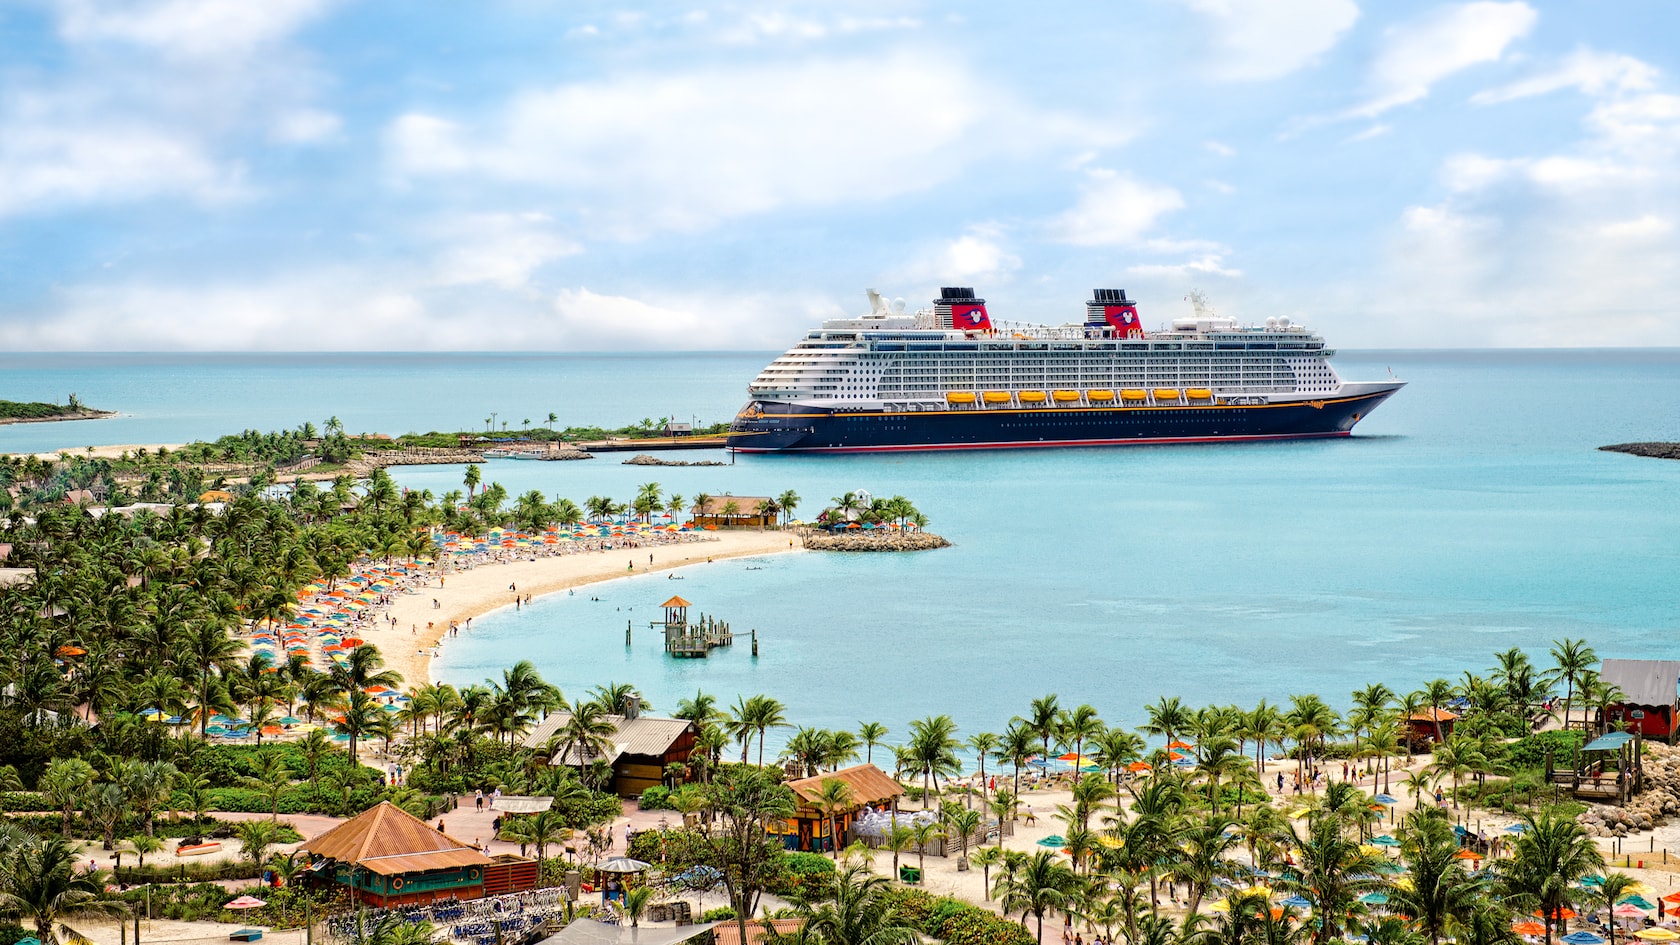 Vote for Disney Cruise Line and Win a Free Cruise!